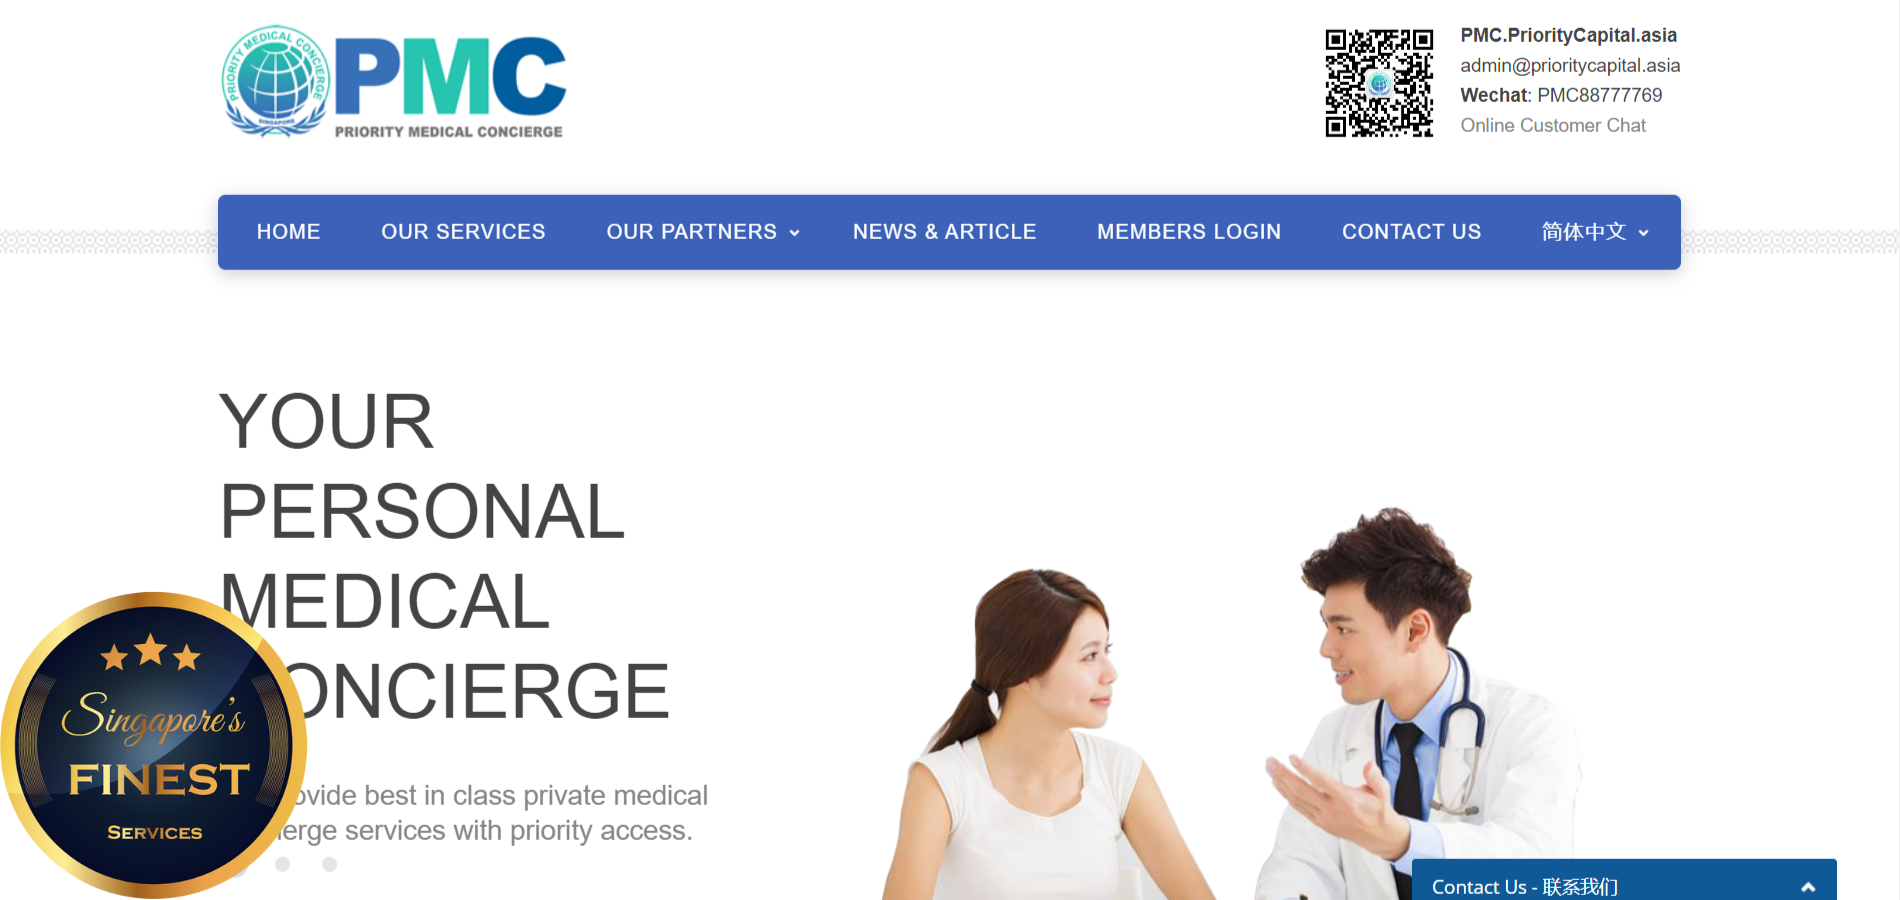 The Finest Medical Concierges in Singapore